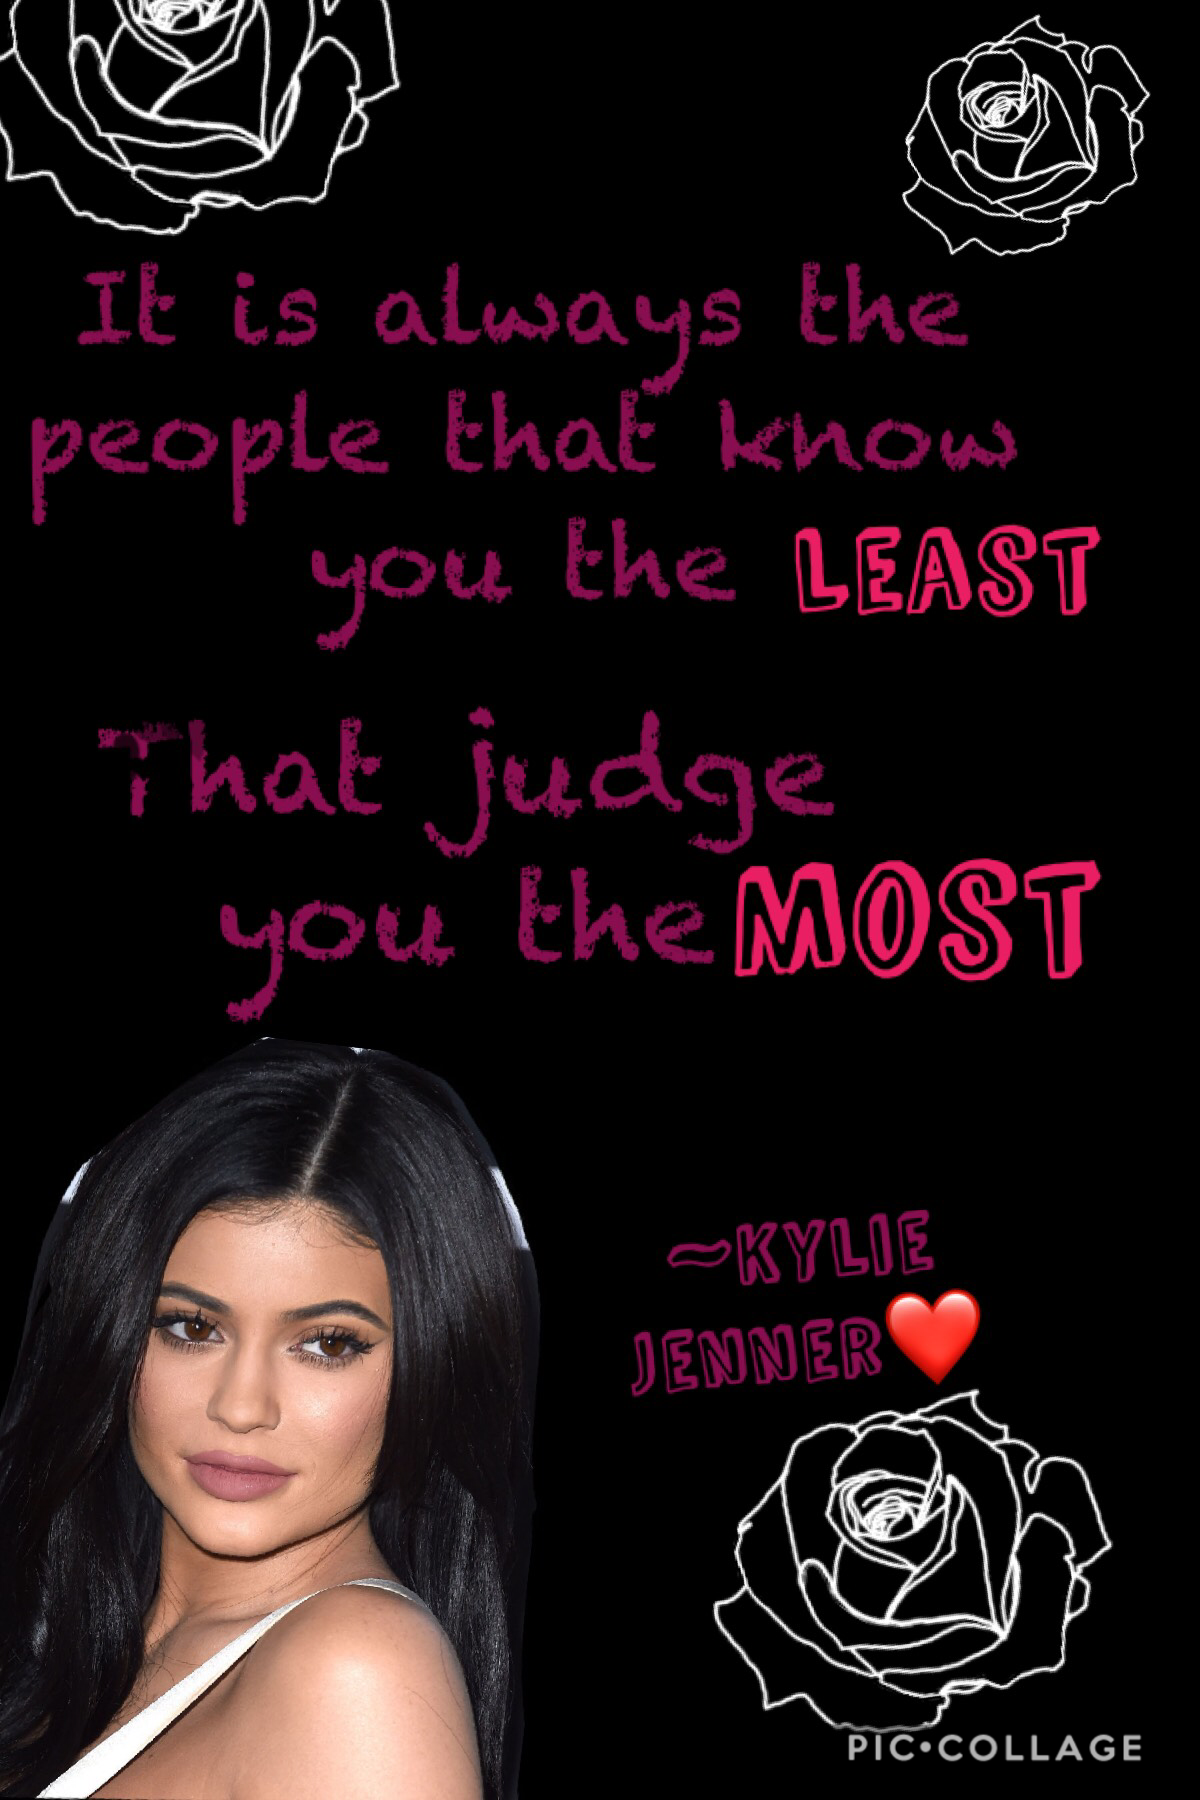 it’s always the people that know you the least 
That judge you the most. 
So ture 